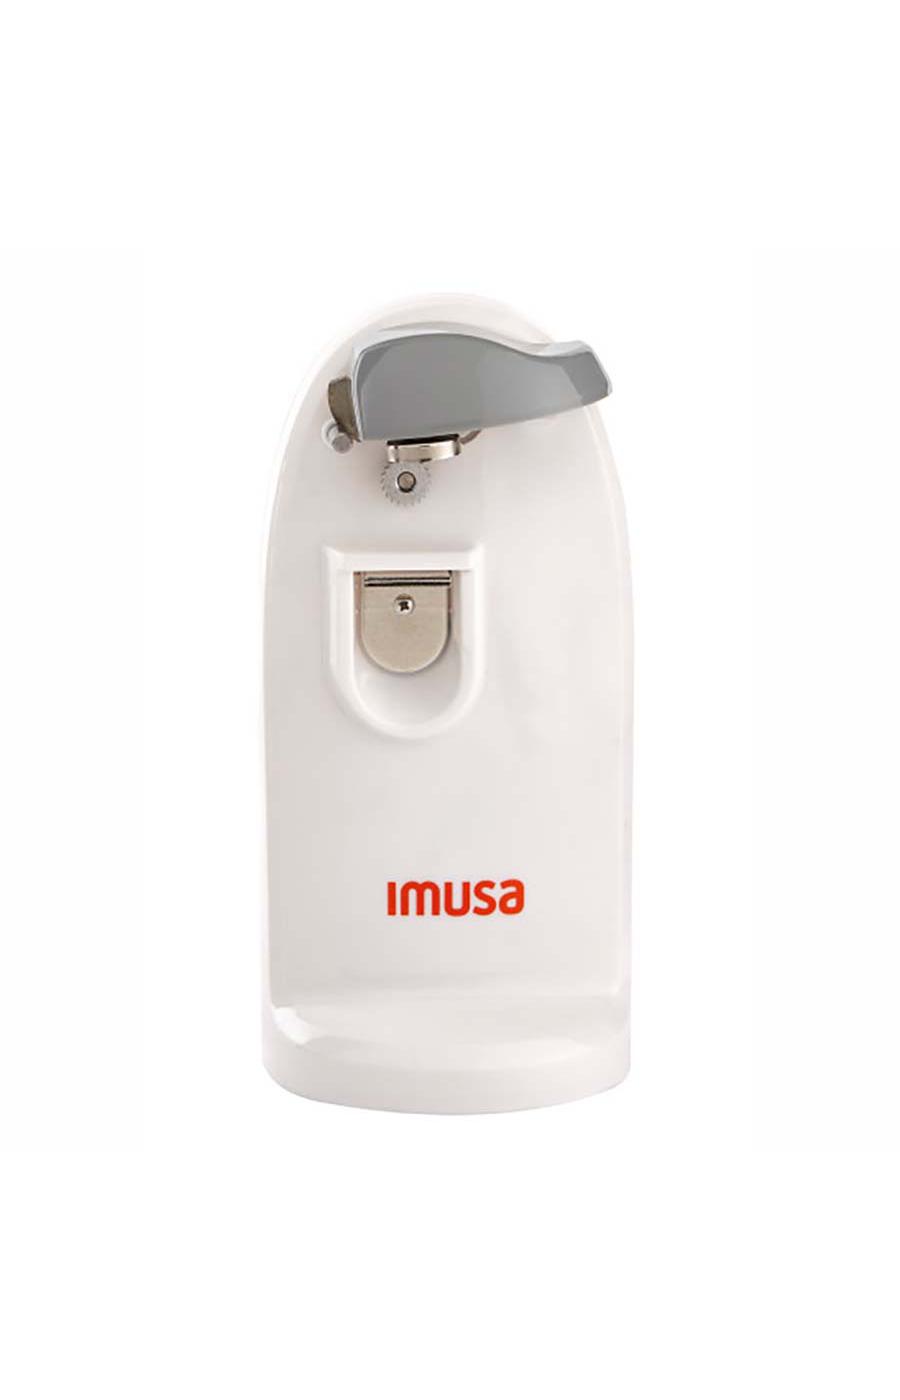 Imusa White 3-In-1 Electric Can Opener - Shop Utensils & Gadgets